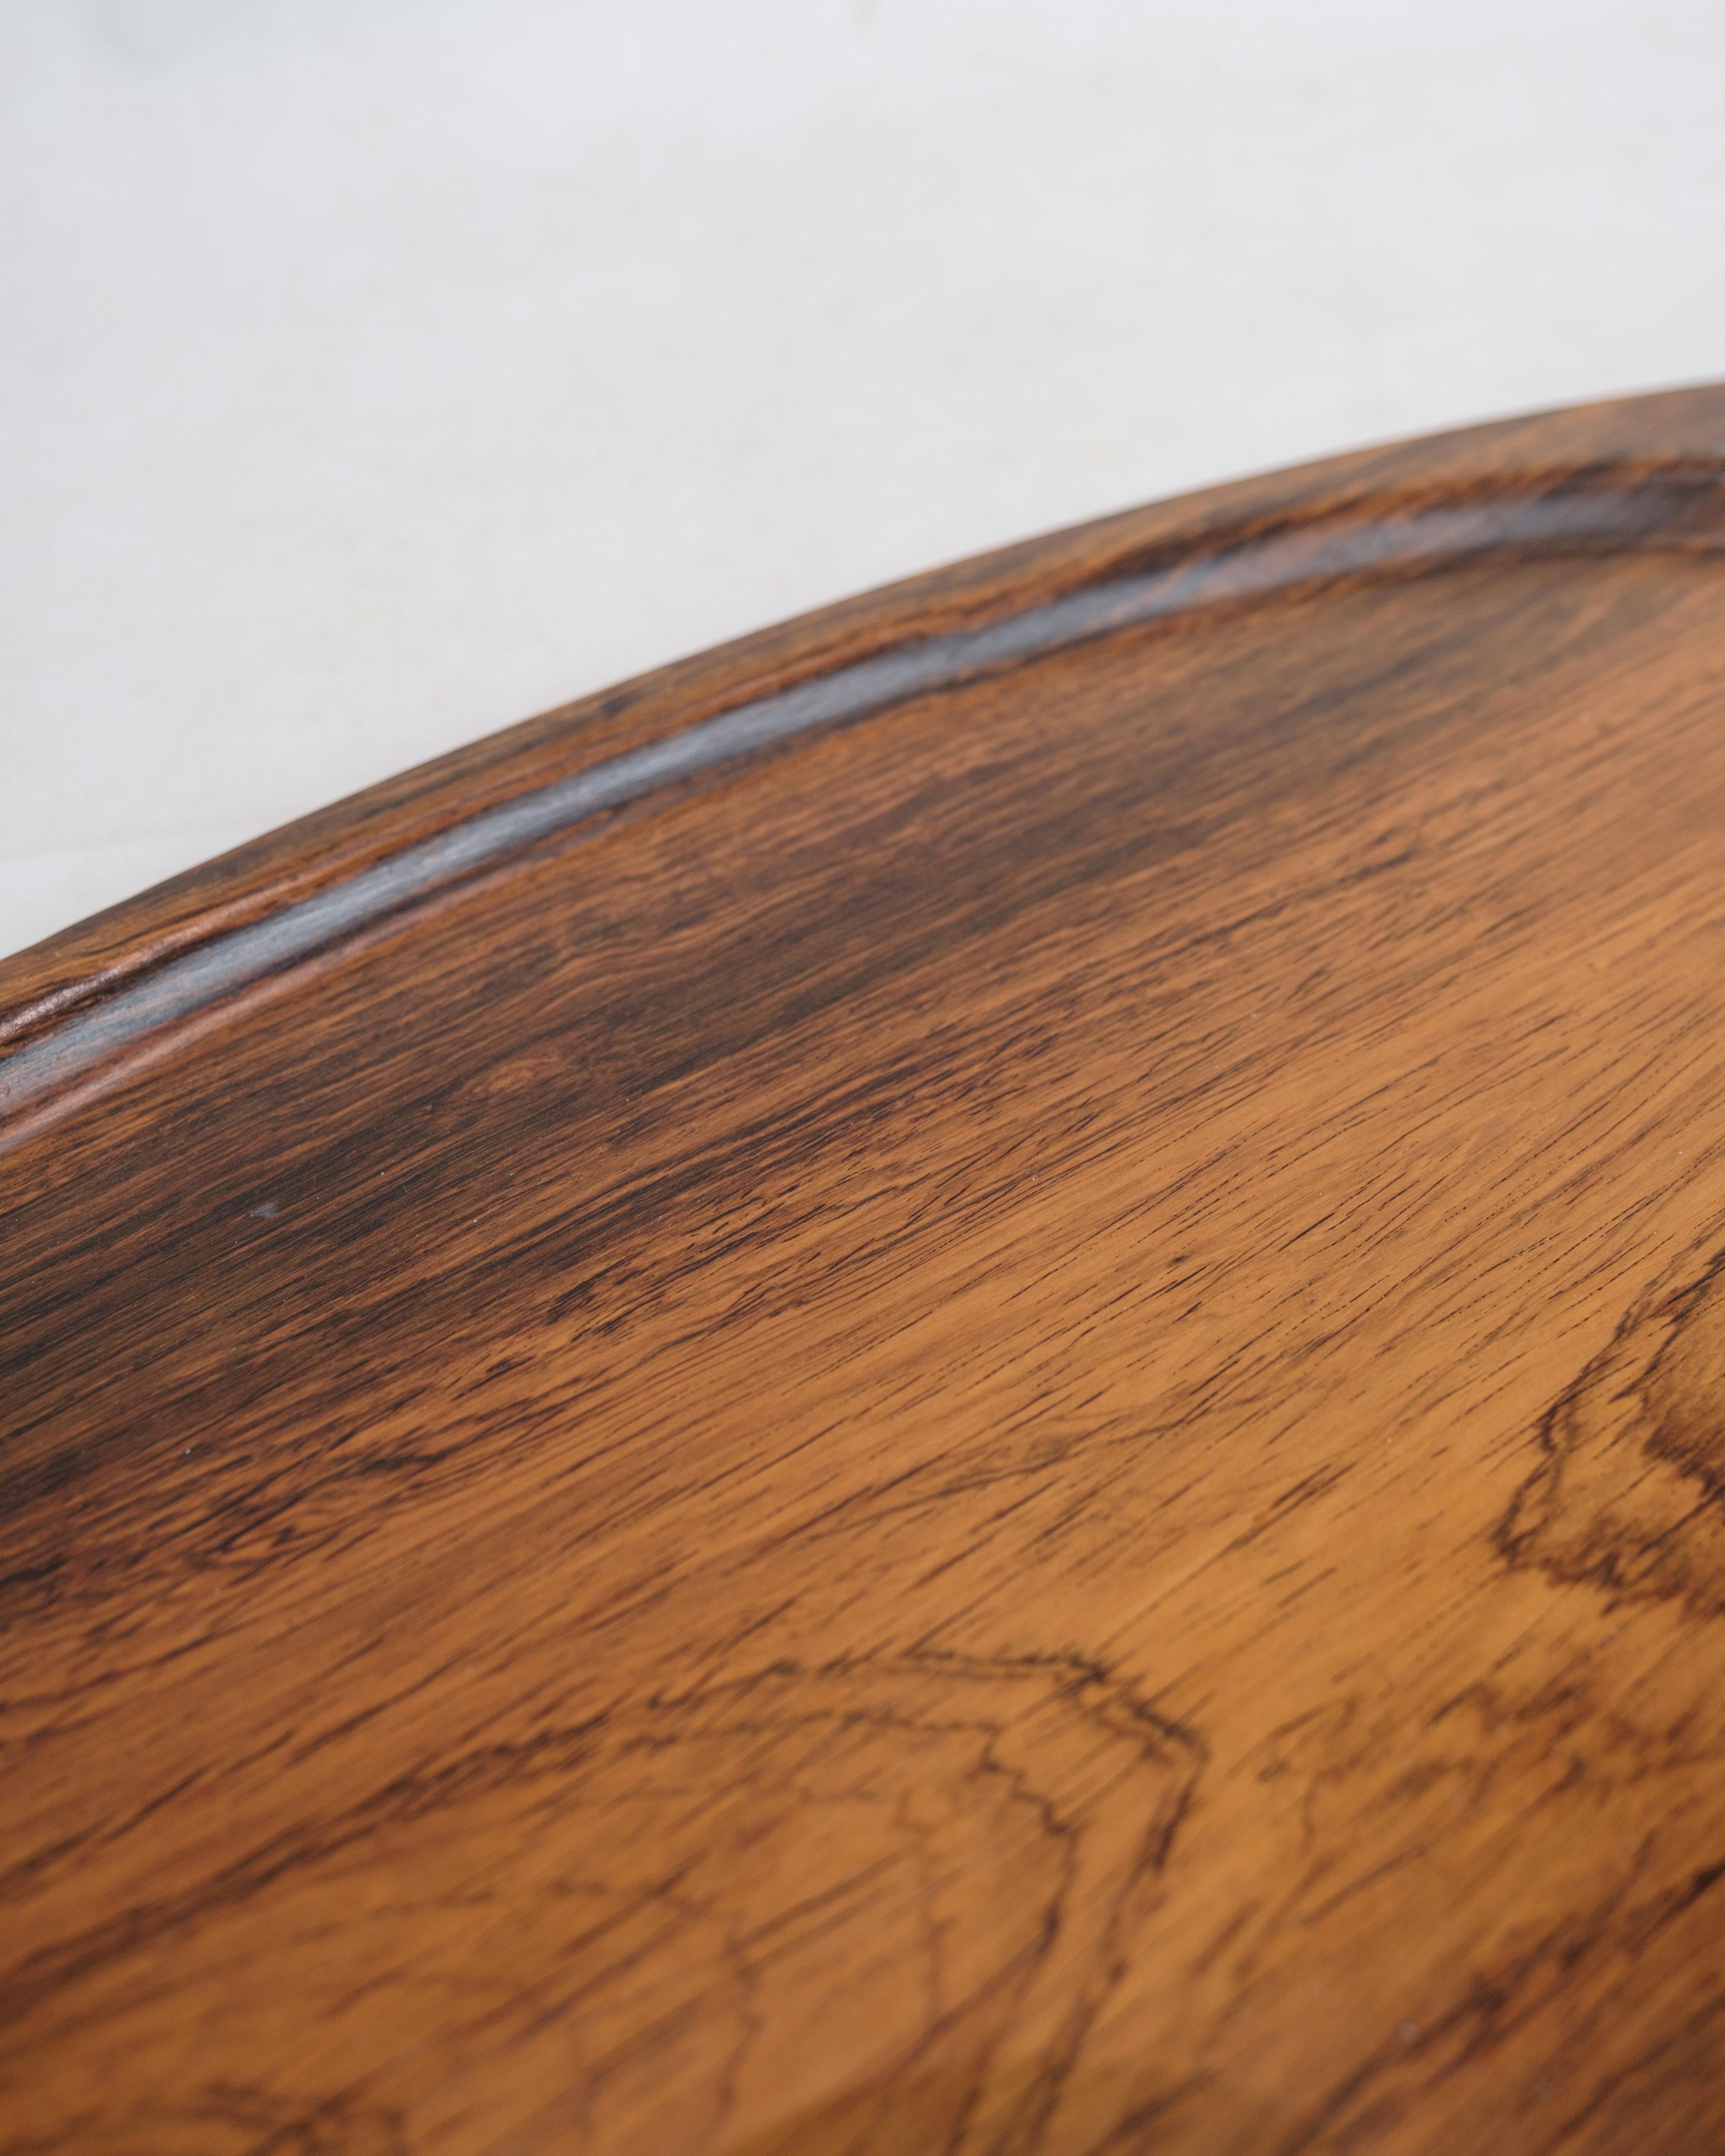 Mid-20th Century Serving Tray Made In Rosewood Made By Silva Manufacturer From 1960s For Sale